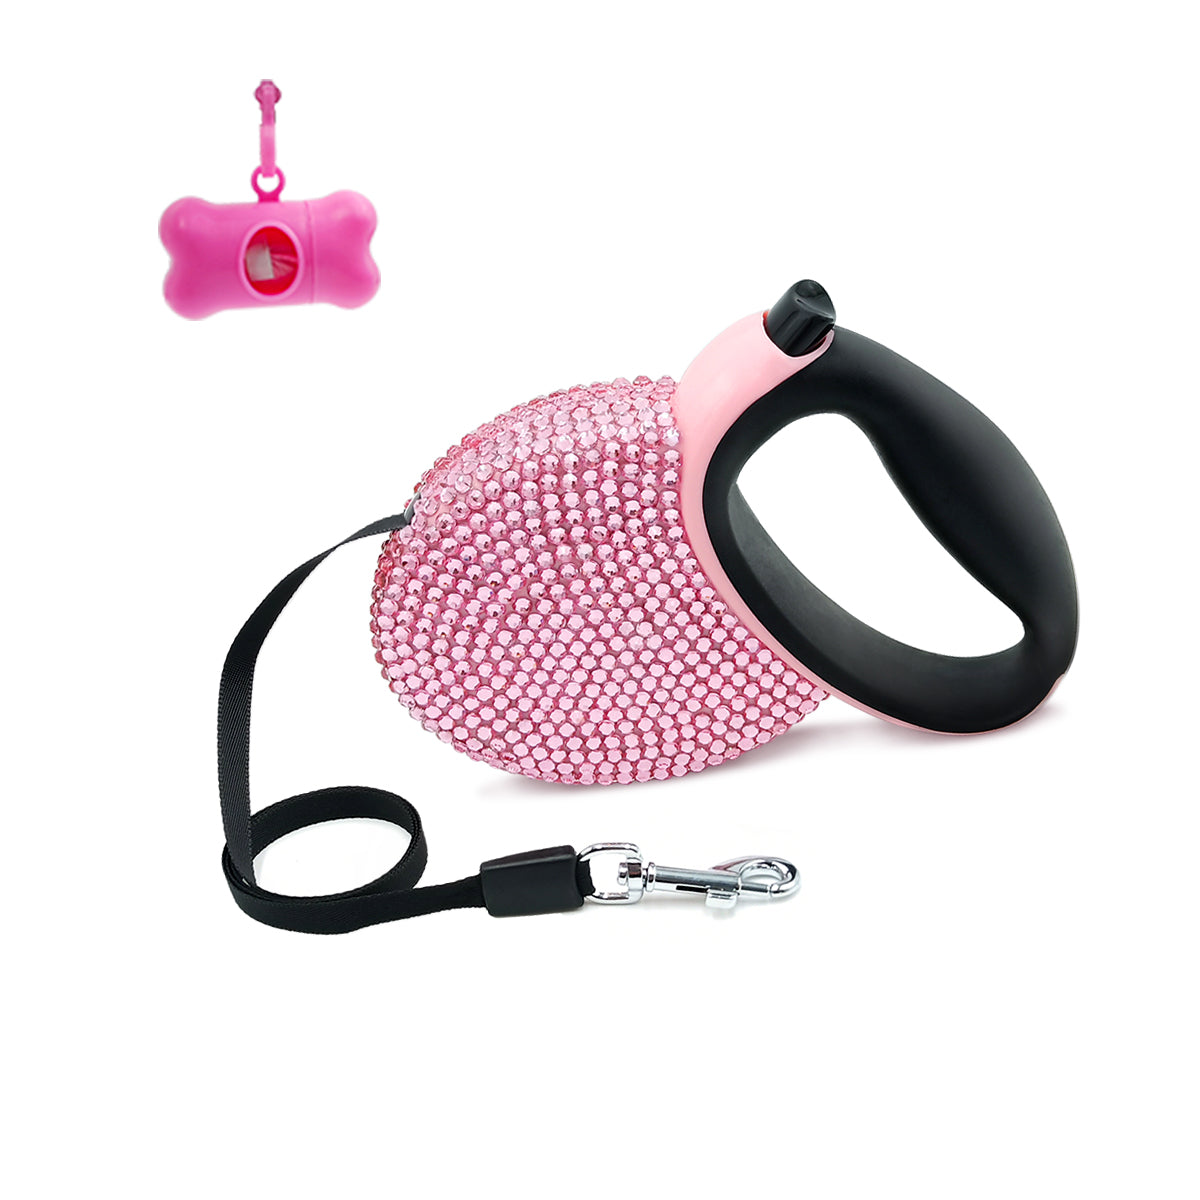 Triumilynn Rhinestone Retractable Dog Leash Bling 10ft, Cat Walking Leash Pink for Small Breed, Gift Waste Bags Dispenser Included, 360¡ã Tangle-Free